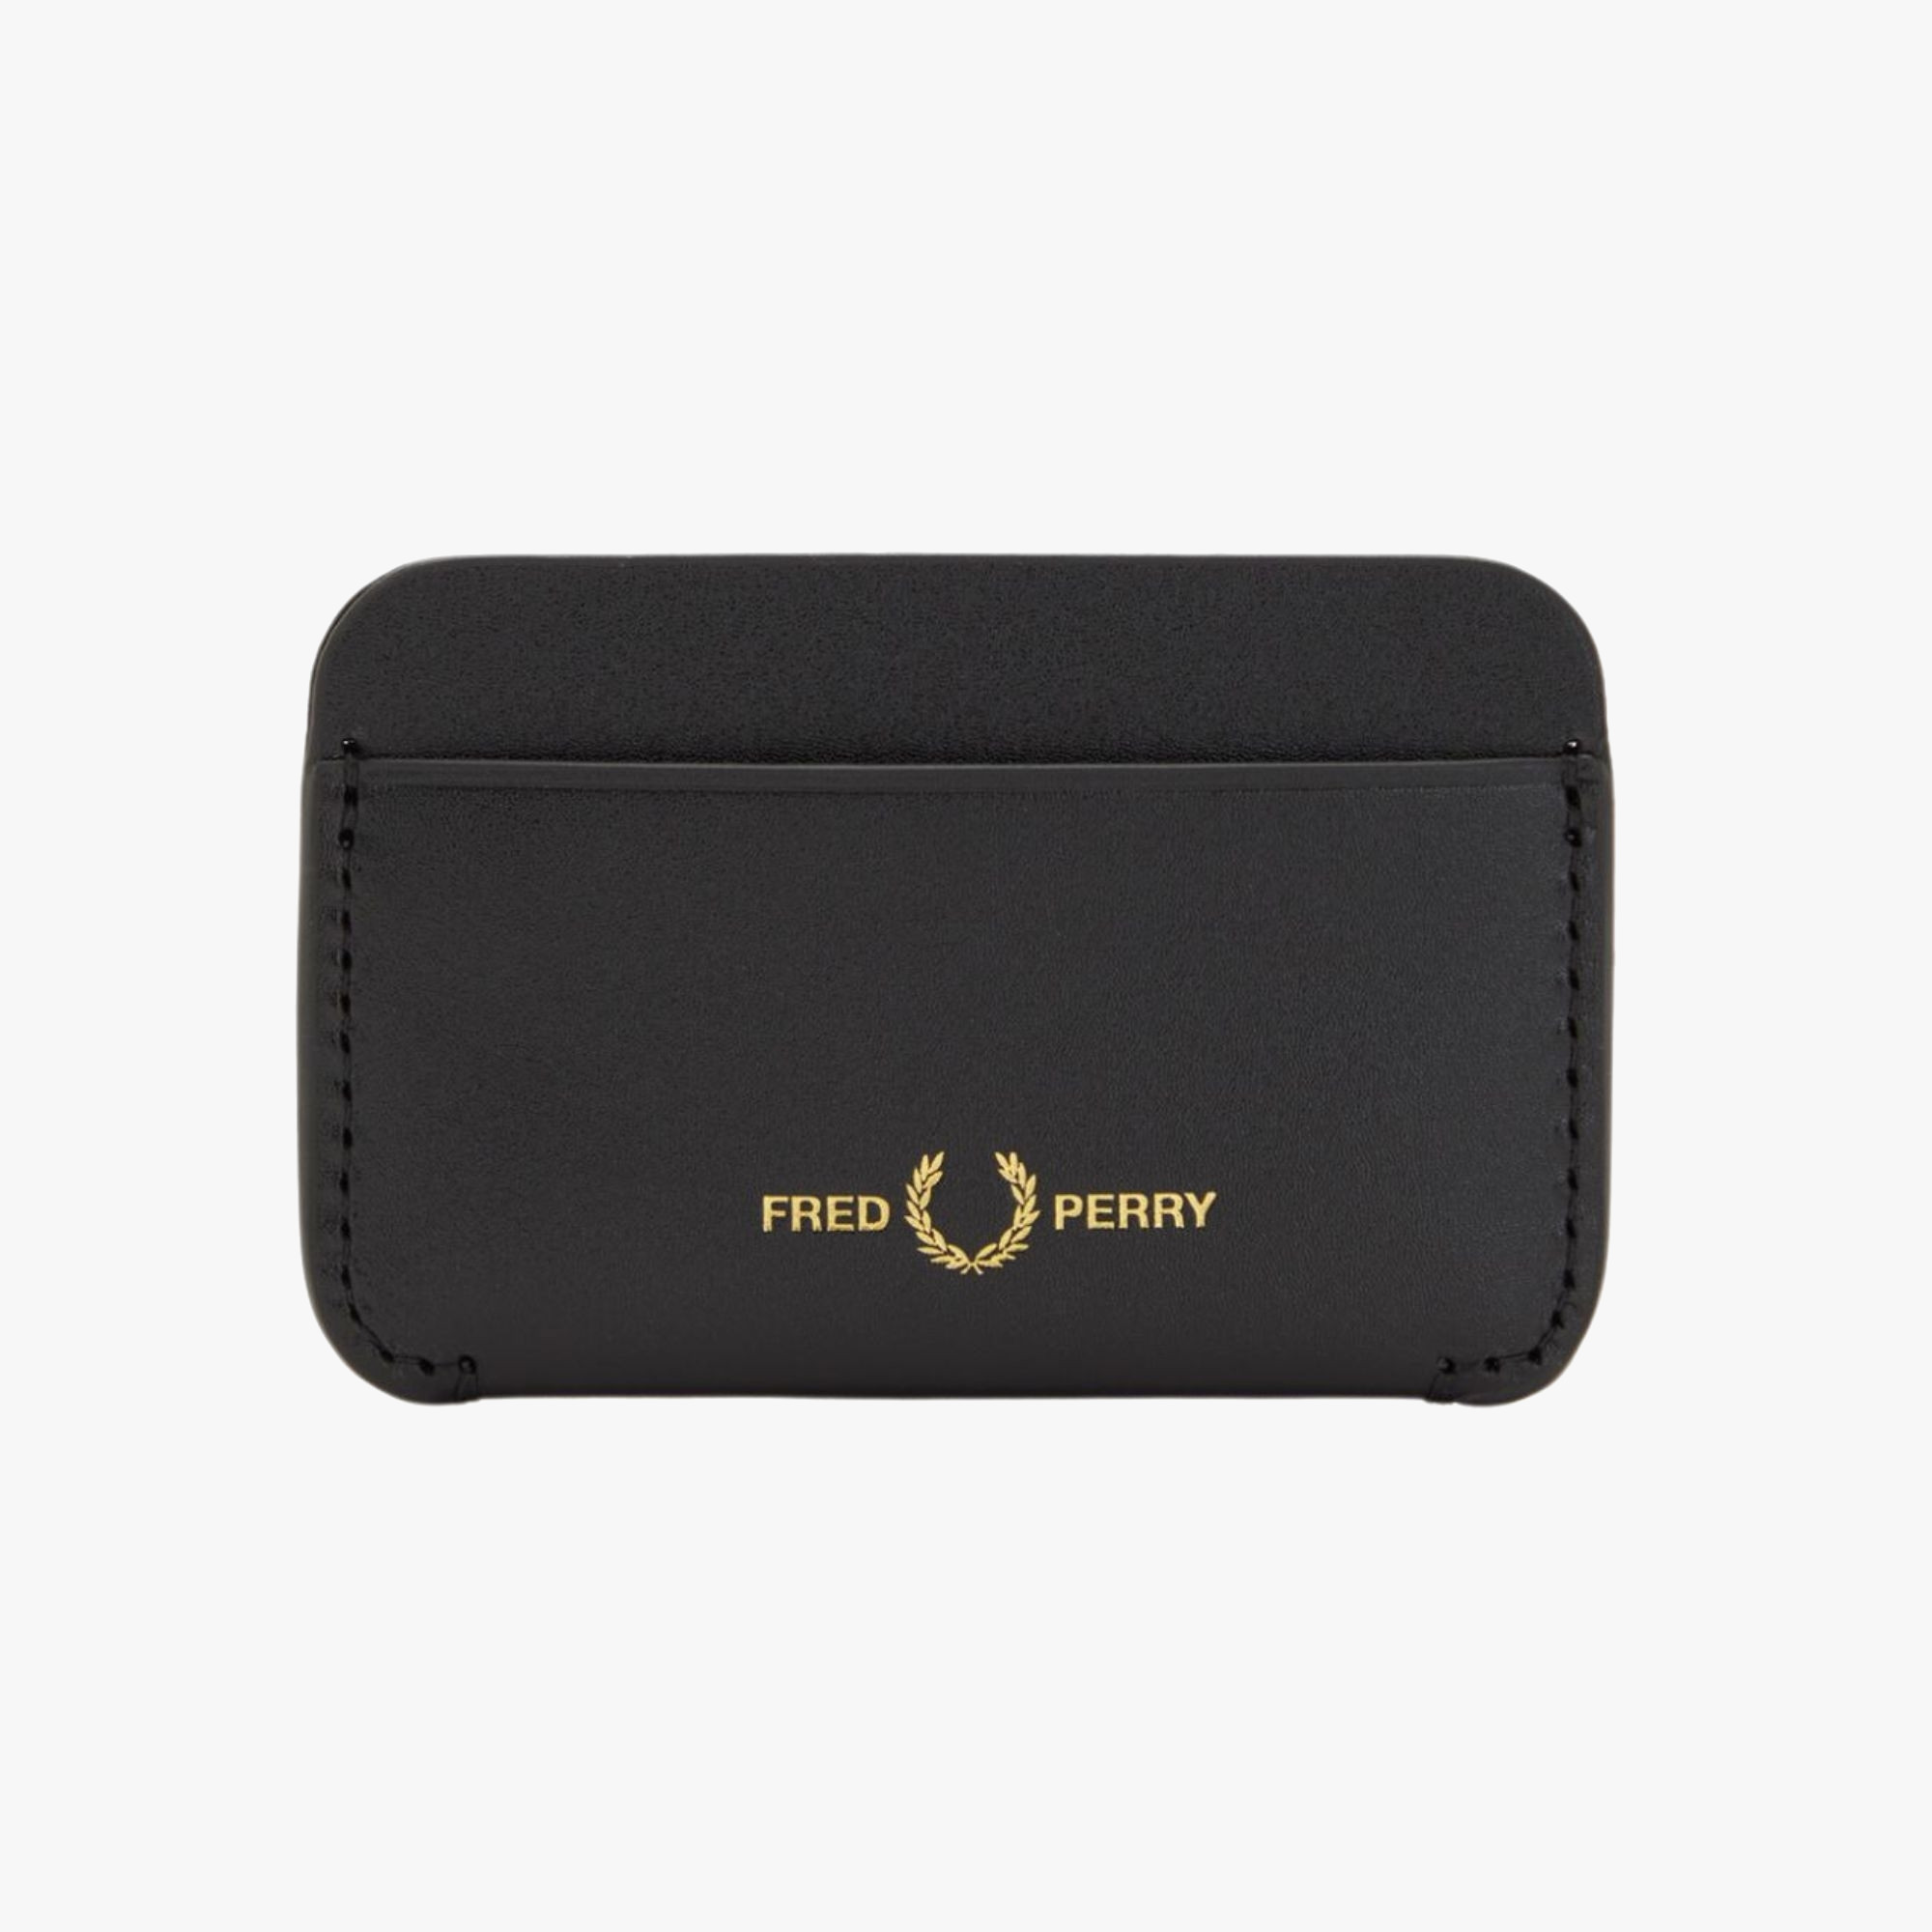 FRED PERRY BURNISHED LEATHER CARDHOLDER BLACK